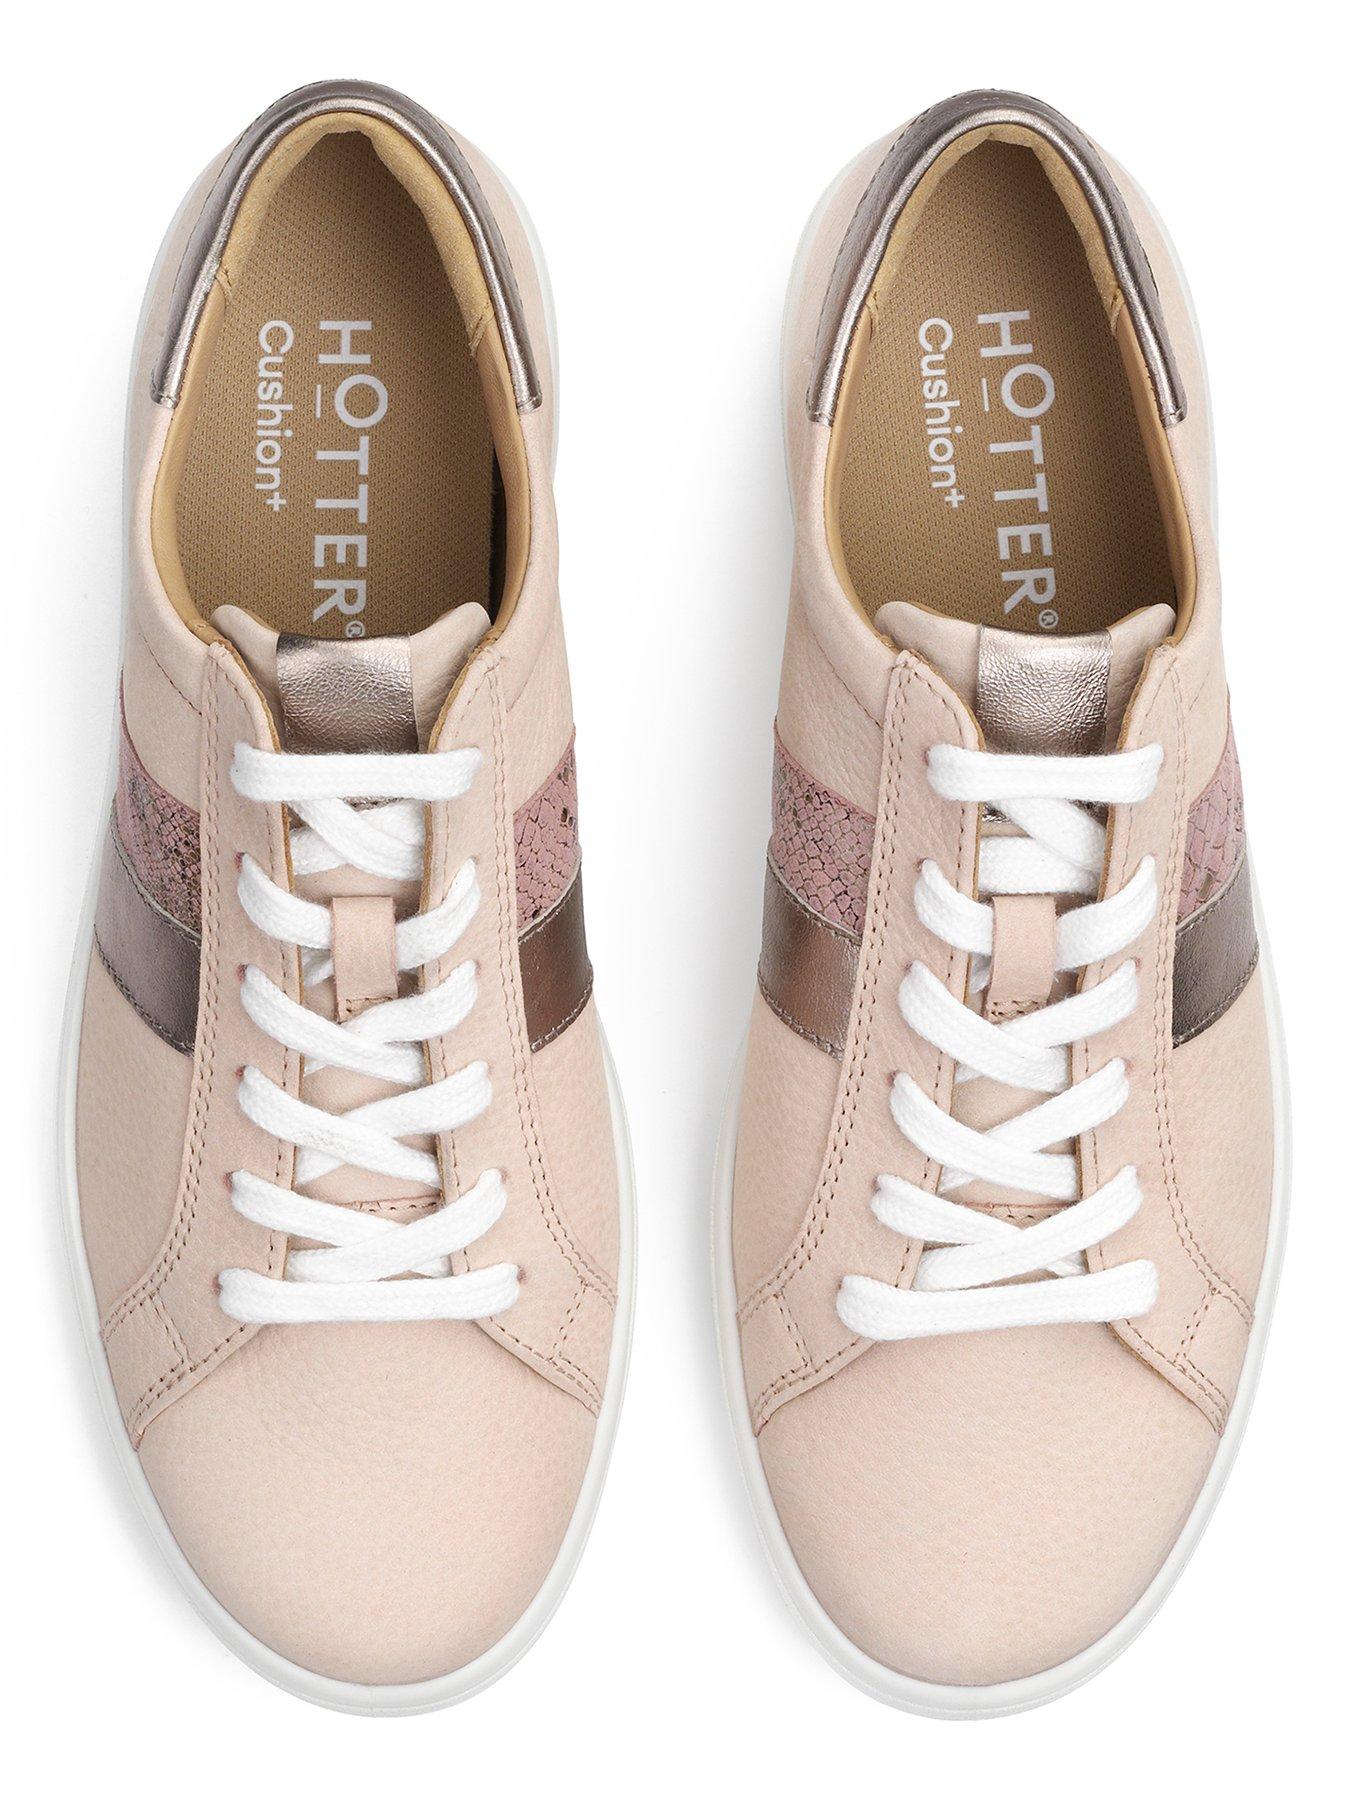 Trainers Switch Trainers - Pink